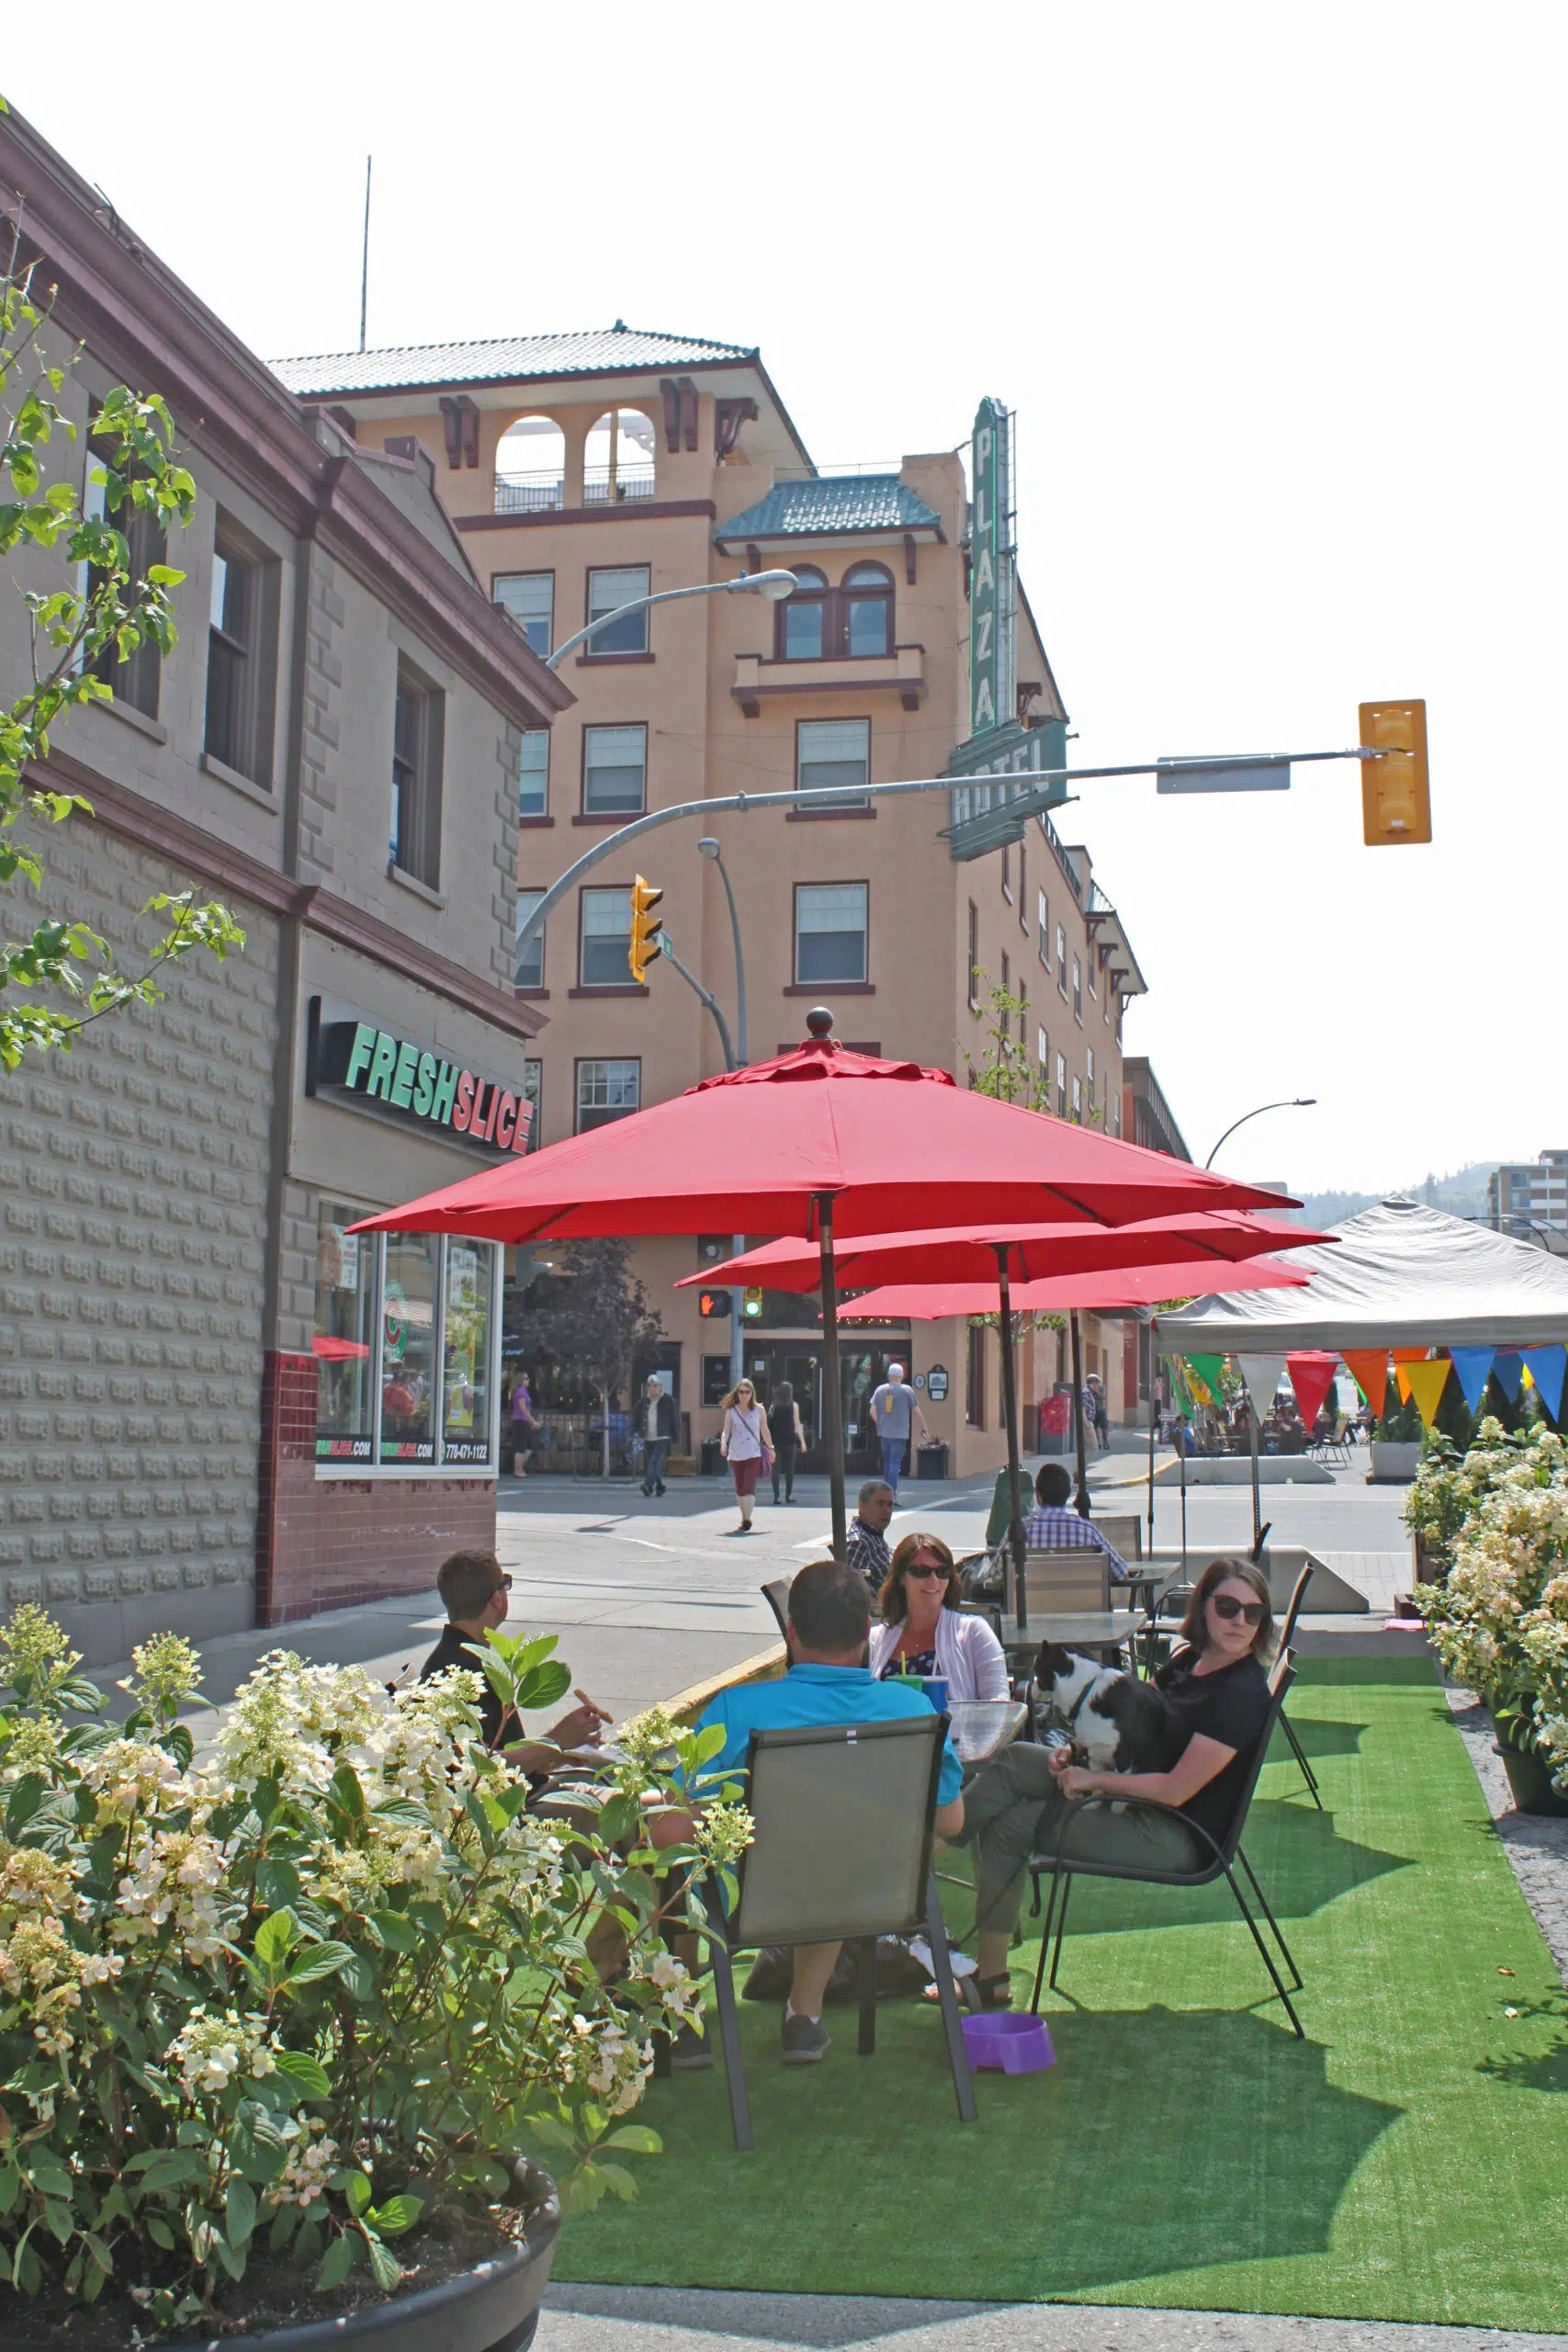 Positive response to 4th Avenue Pedestrian Plaza pilot project in Kamloops